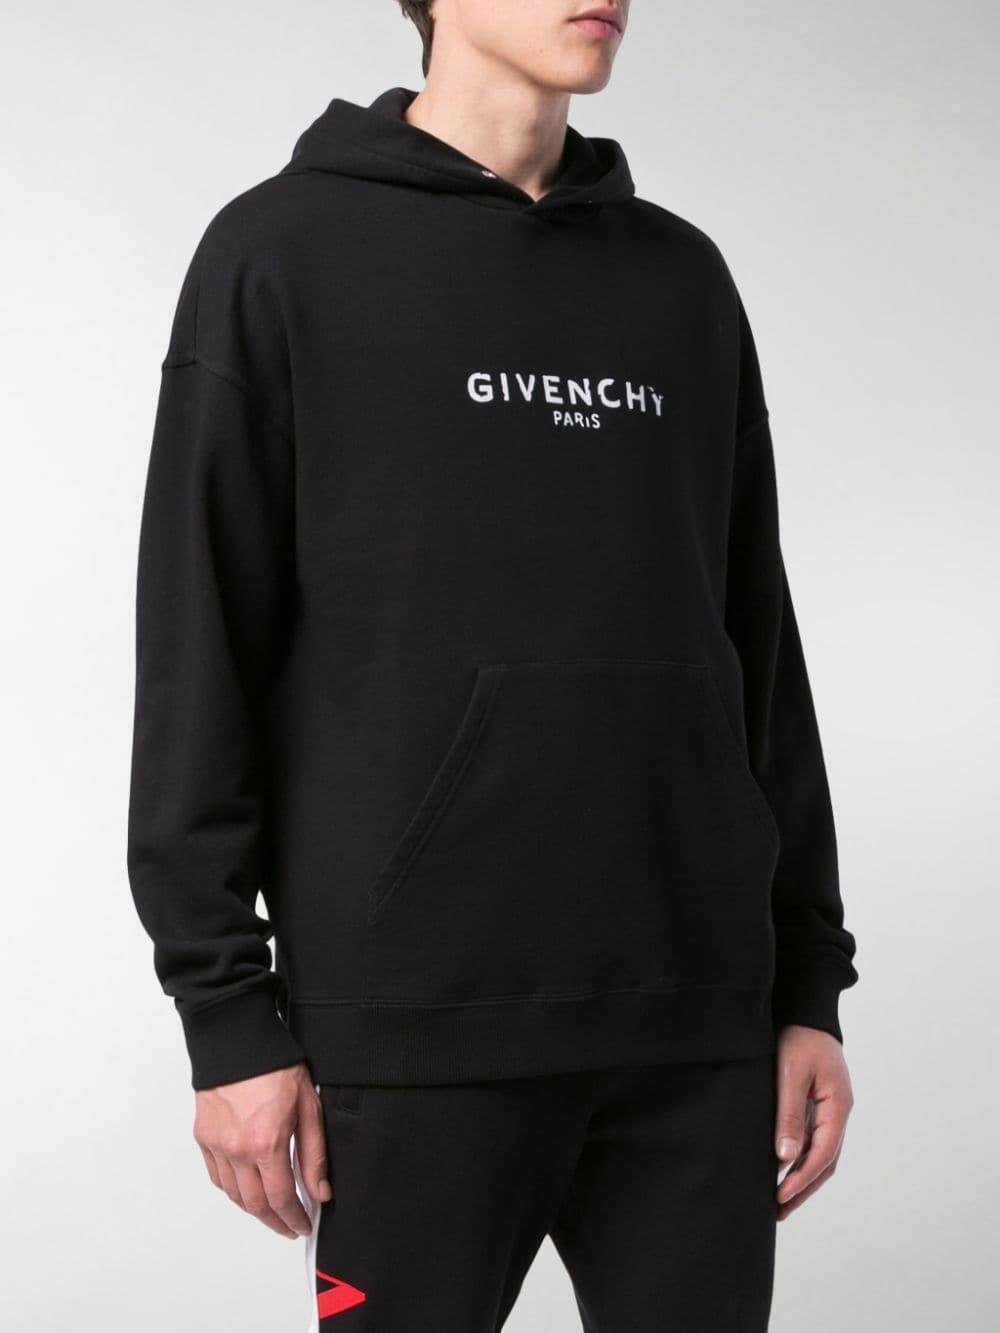 Givenchy Cotton Blurred Paris Hoodie in Black for Men - Lyst